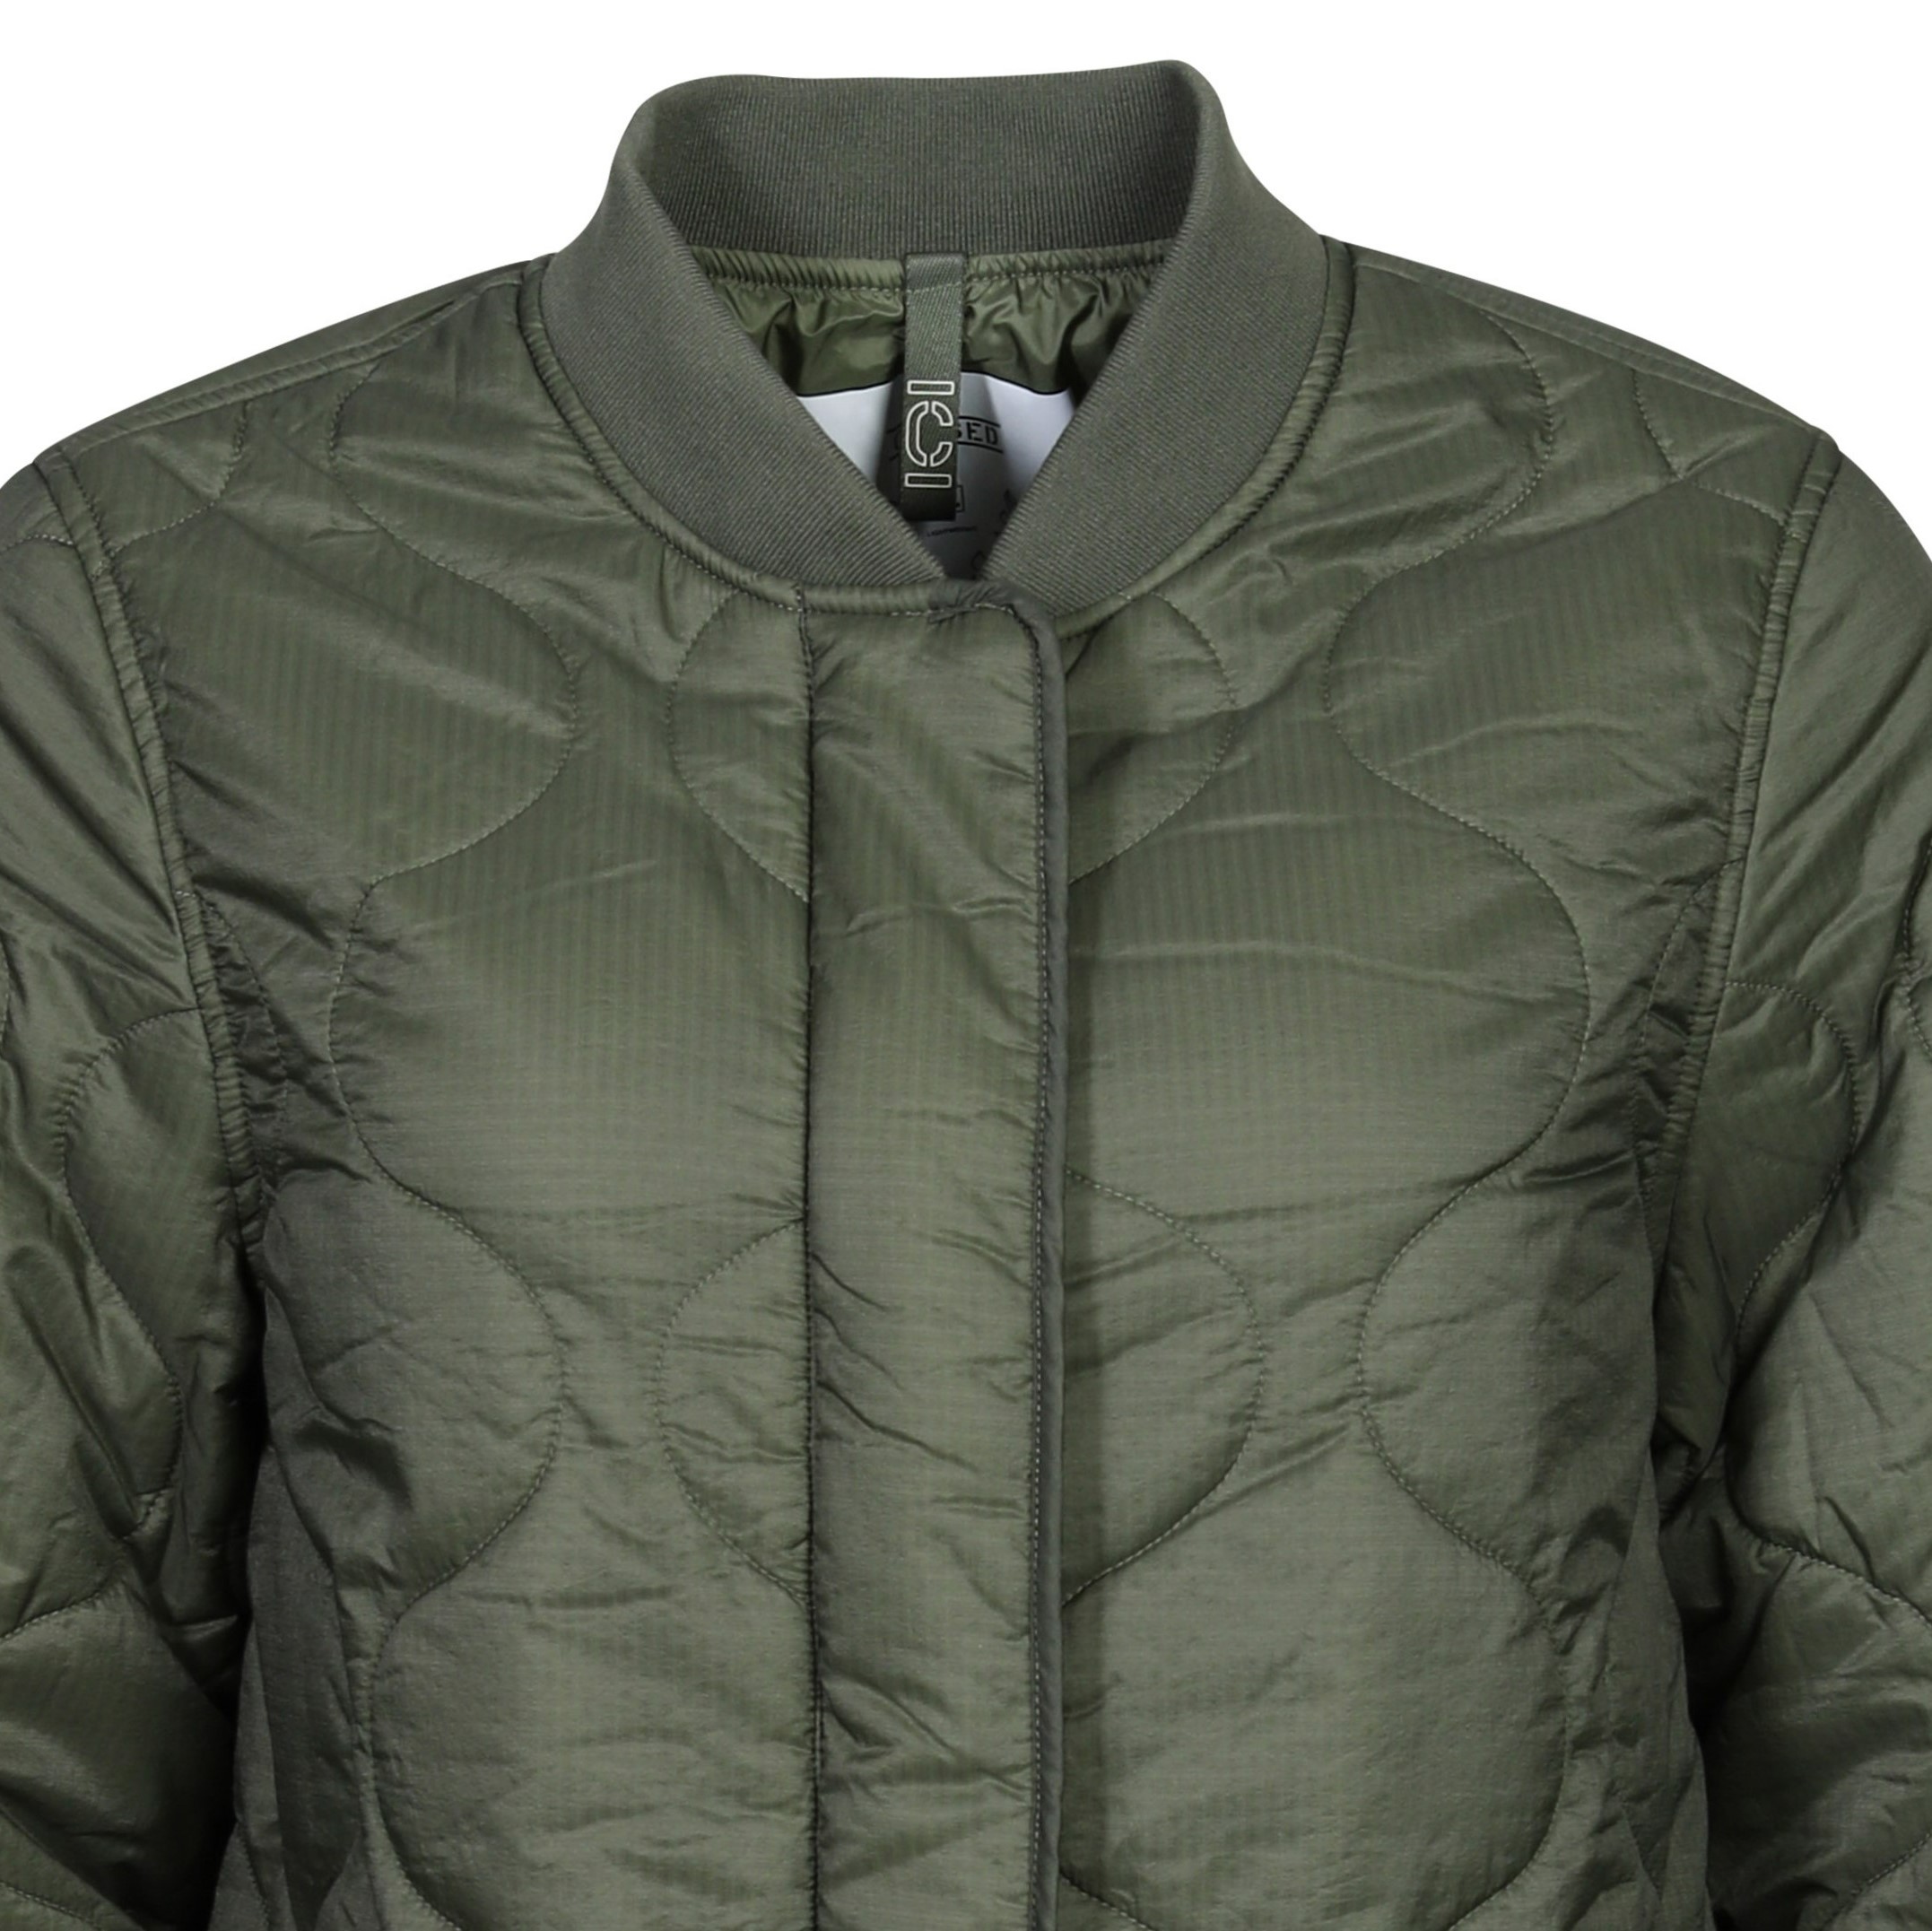 Closed Light Weight Nylon Coat in Army Green S